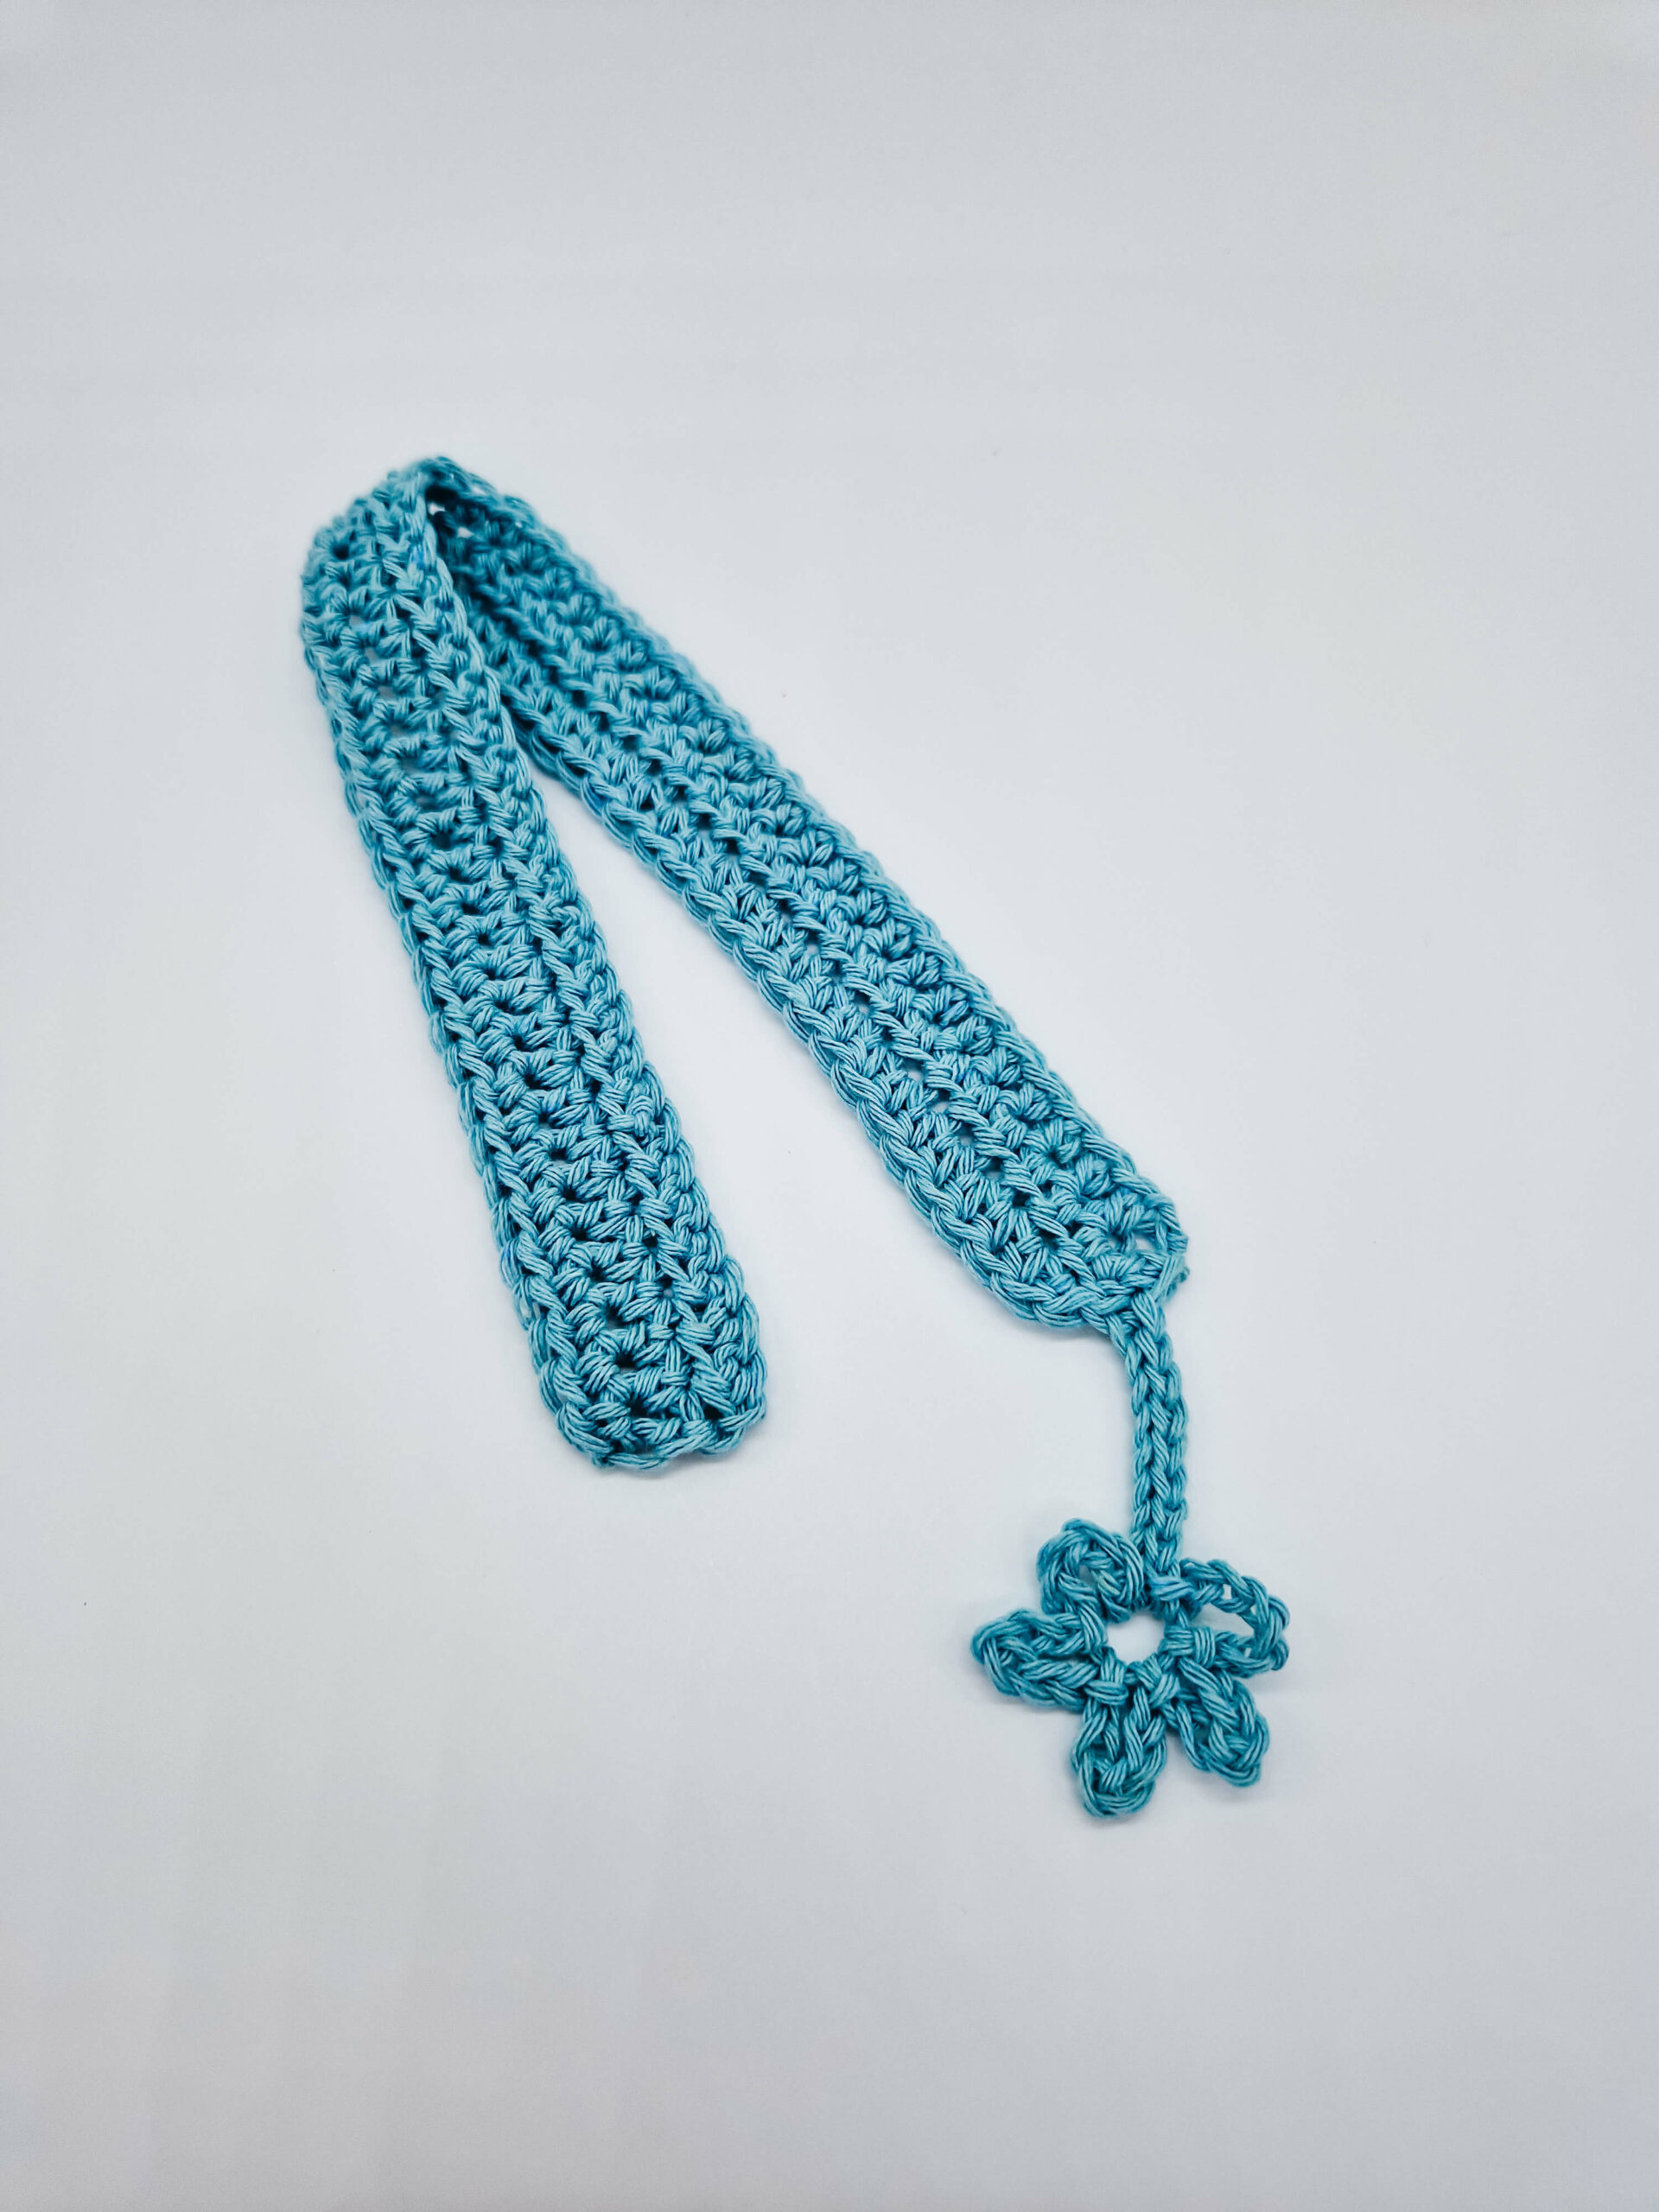 Half Double Crochet Bookmark with a Delicate Flower Accent